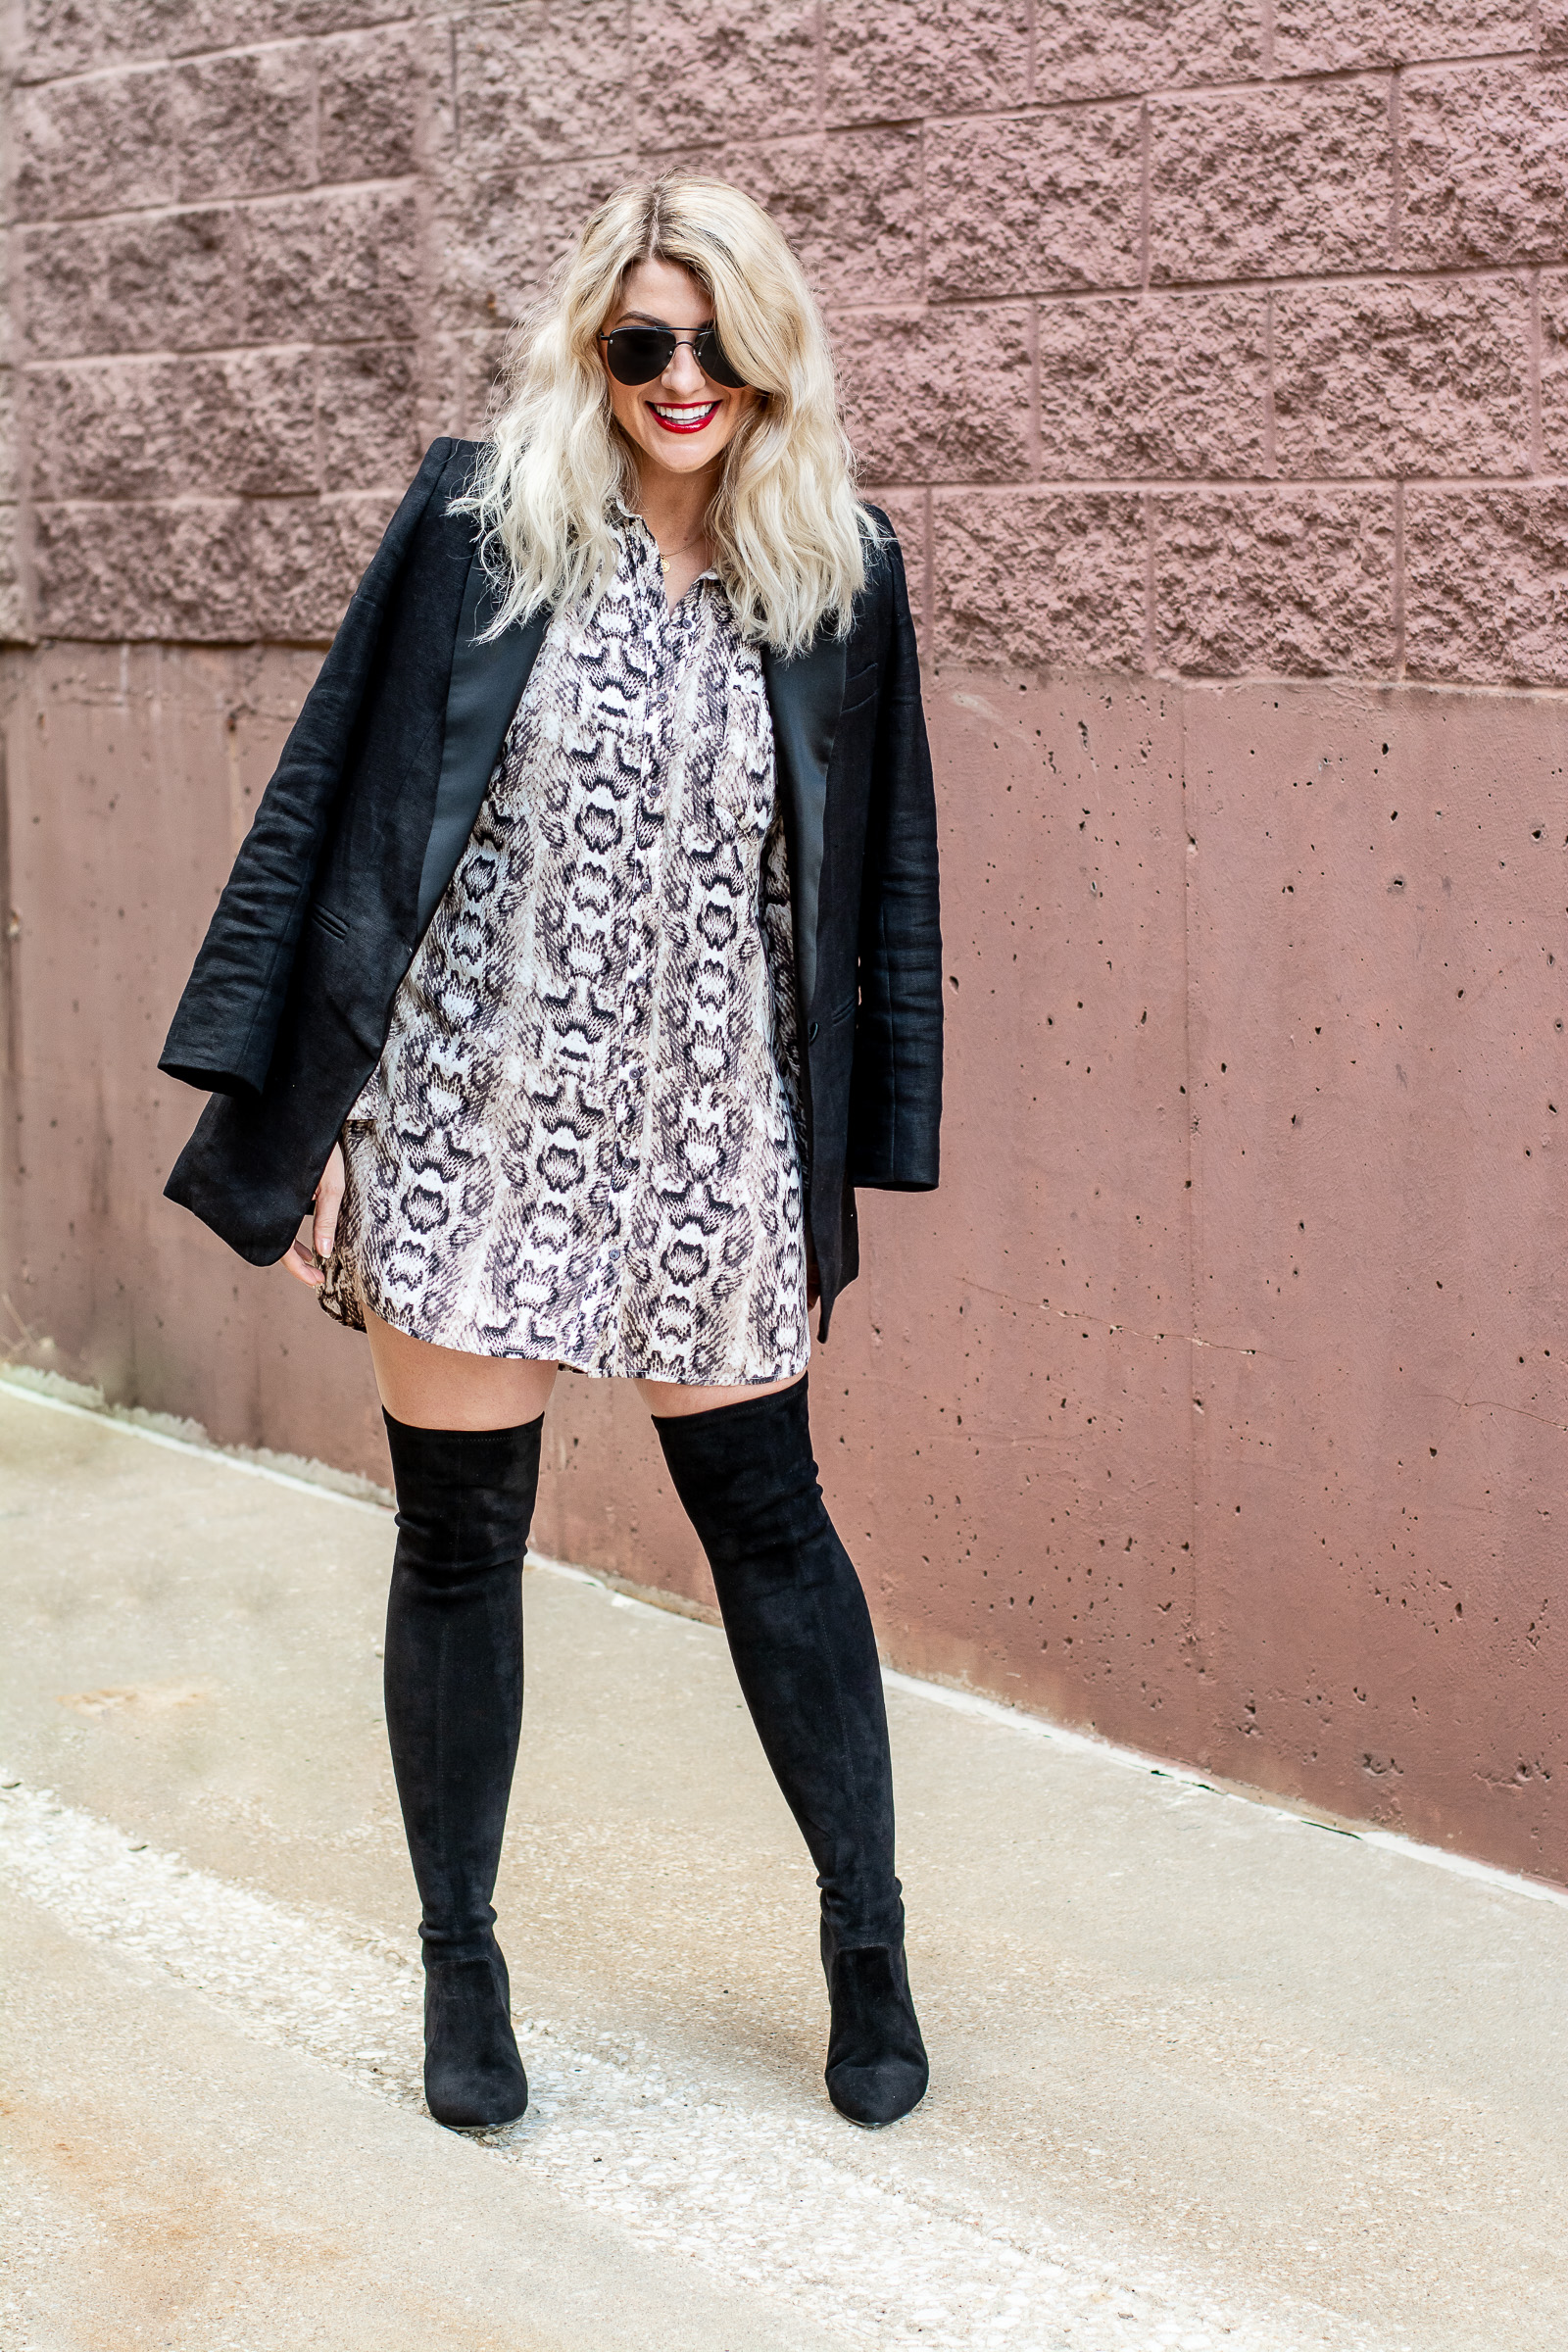 Holiday Outfit: Snakeskin Dress + OTK Boots. | LSR